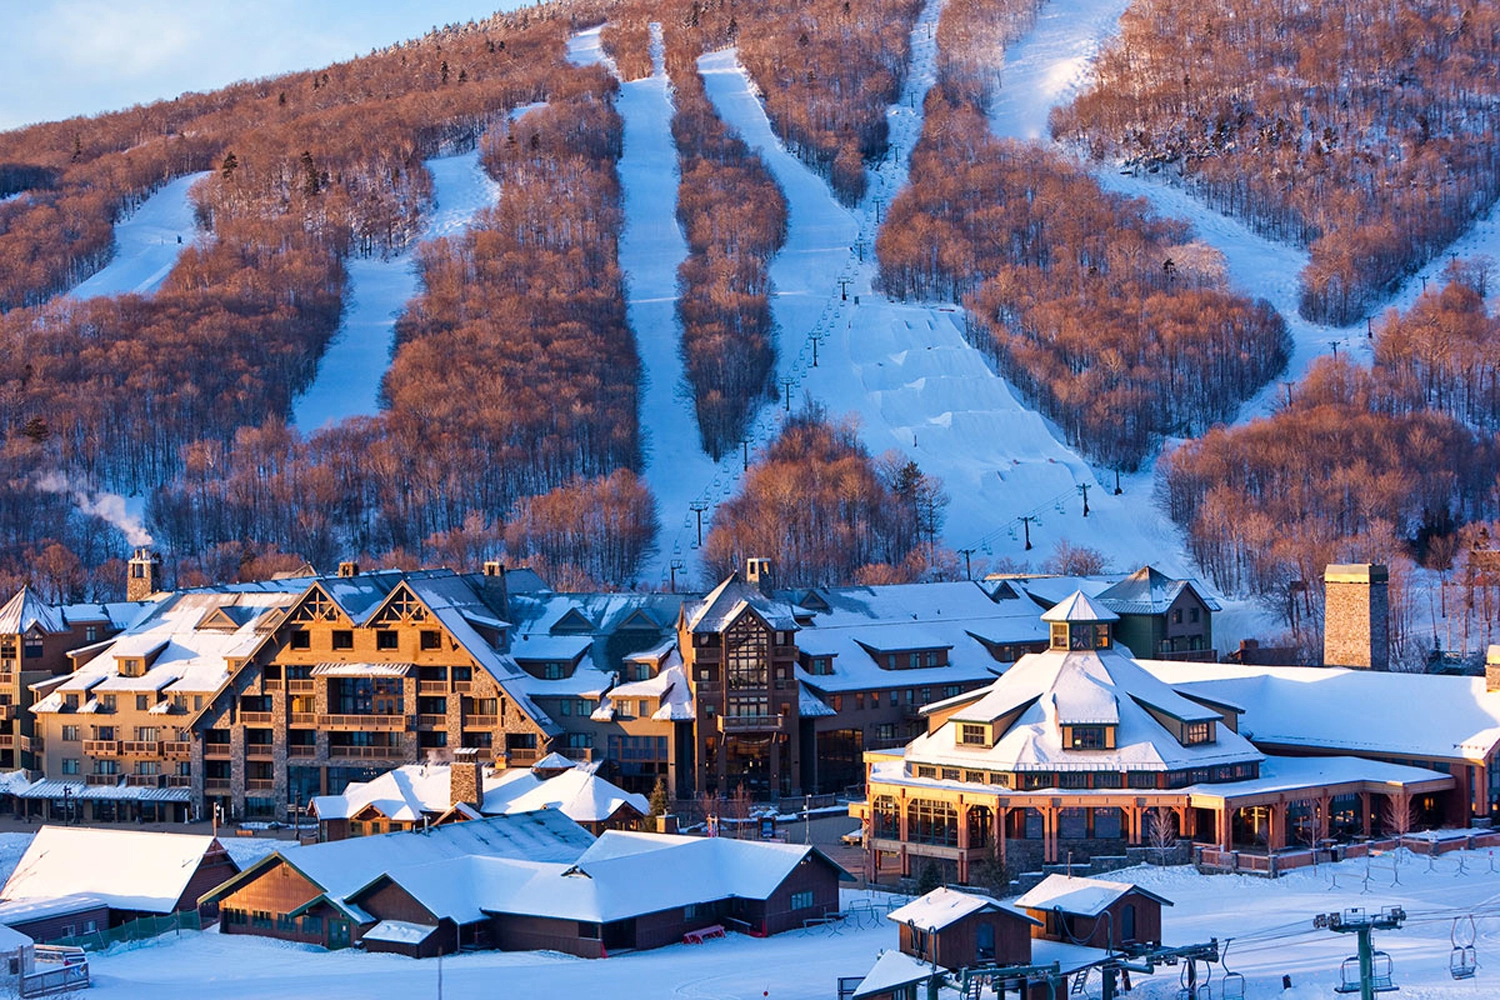 Stowe Mountain Resort Lodge and Lifts